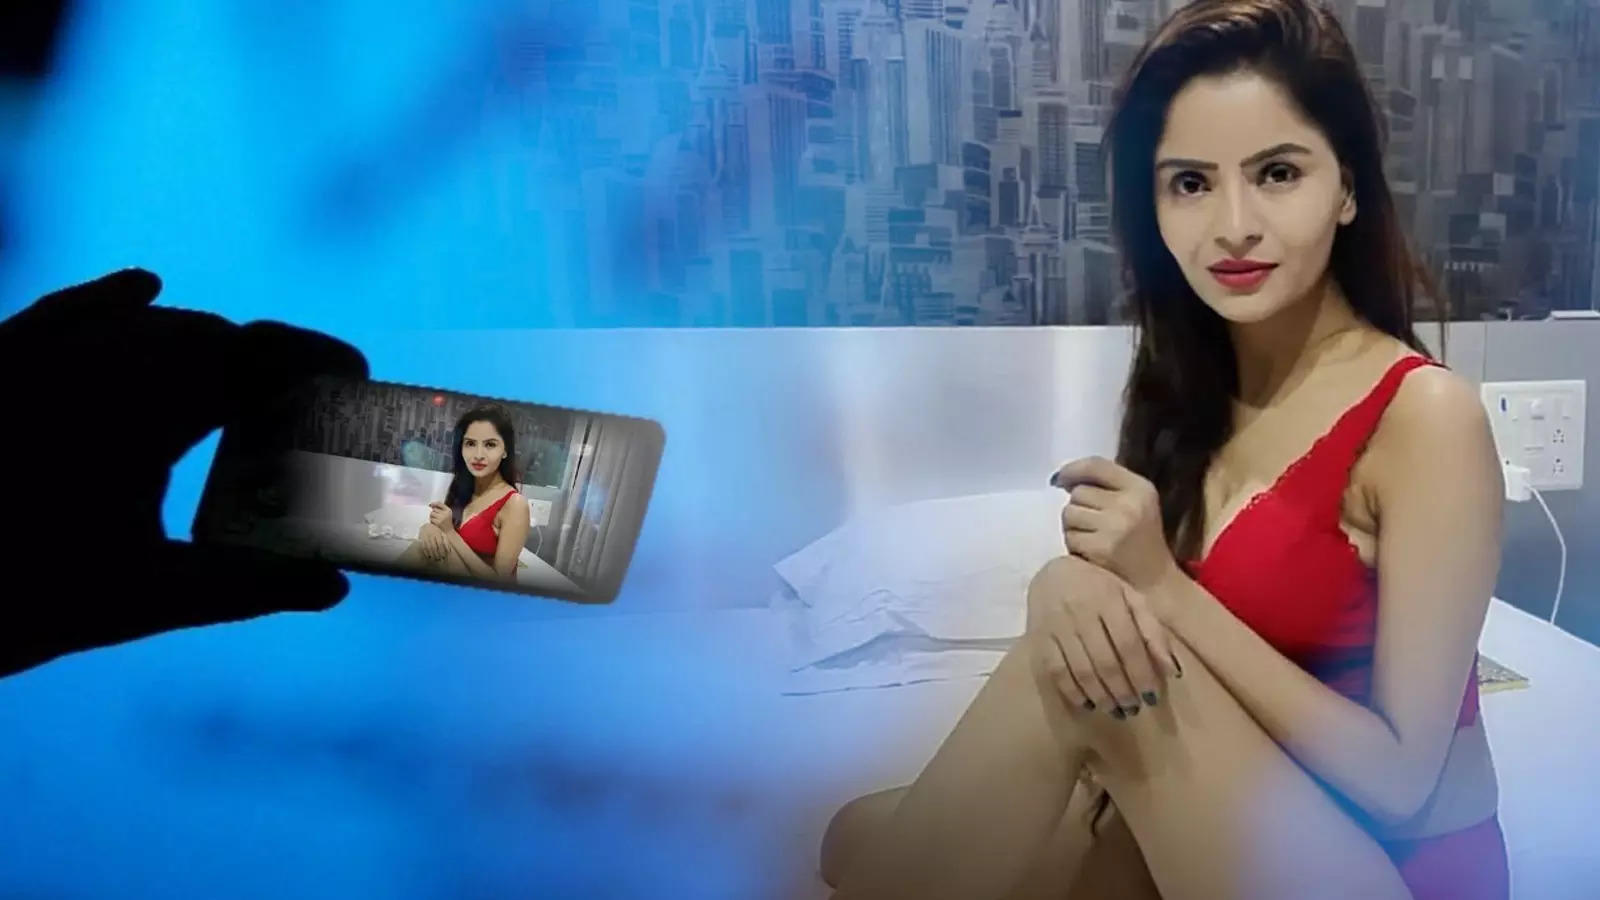 Porn film case: SC breather to actor Gehana Vasisth from arrest | Hindi  Movie News - Times of India